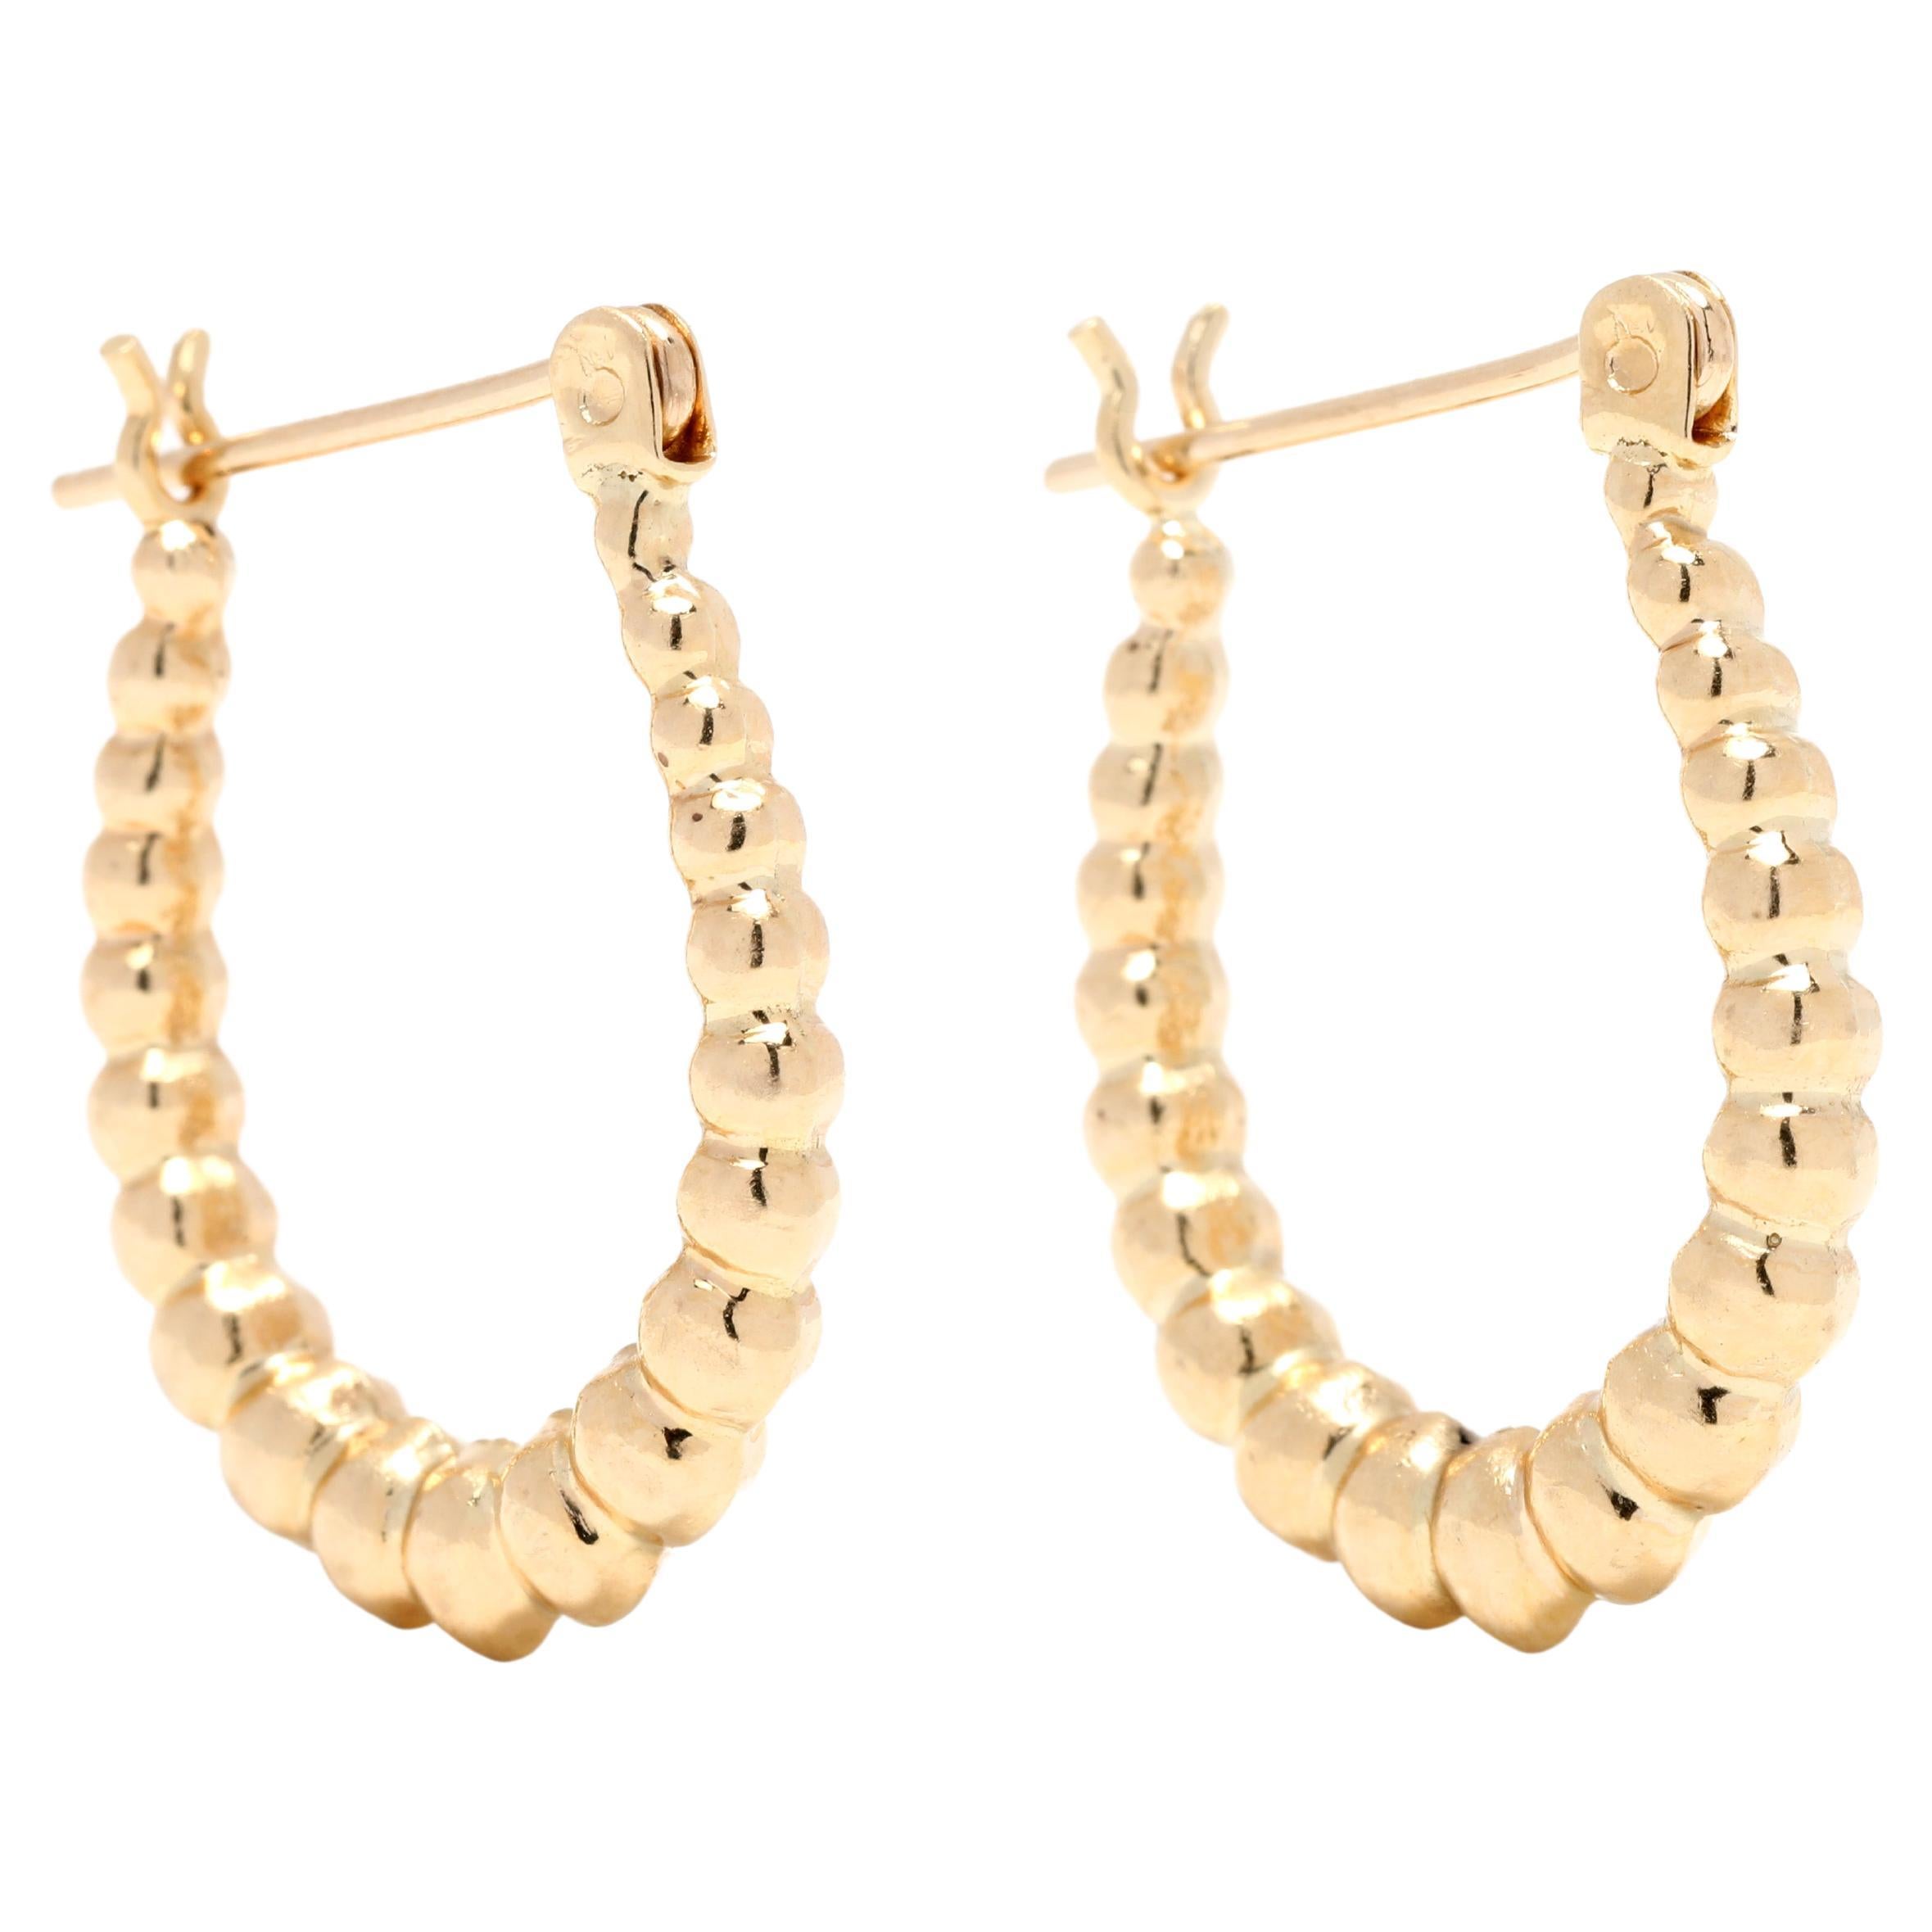 Small Gold Bubble Hoop Earrings, 14k Yellow Gold, Everyday Gold